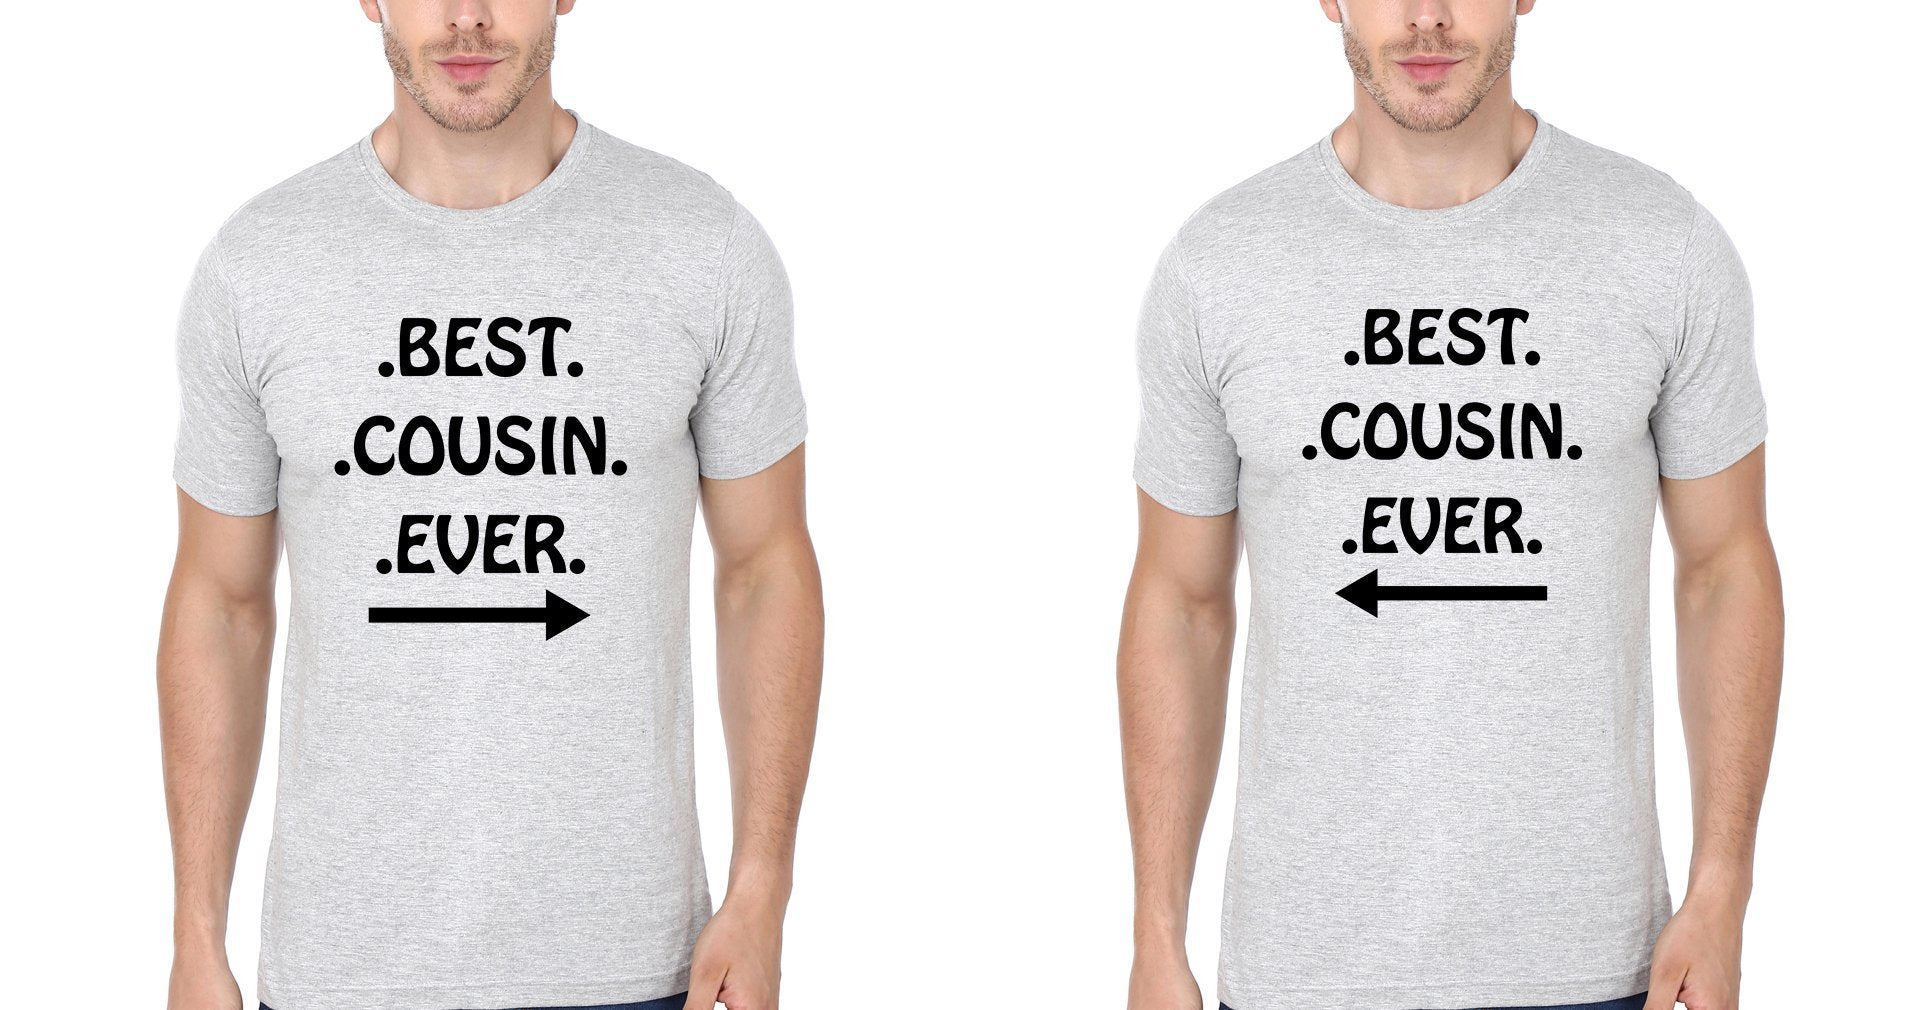 Best Cousin Ever Half Sleeves T-Shirts-FunkyTradition - FunkyTradition